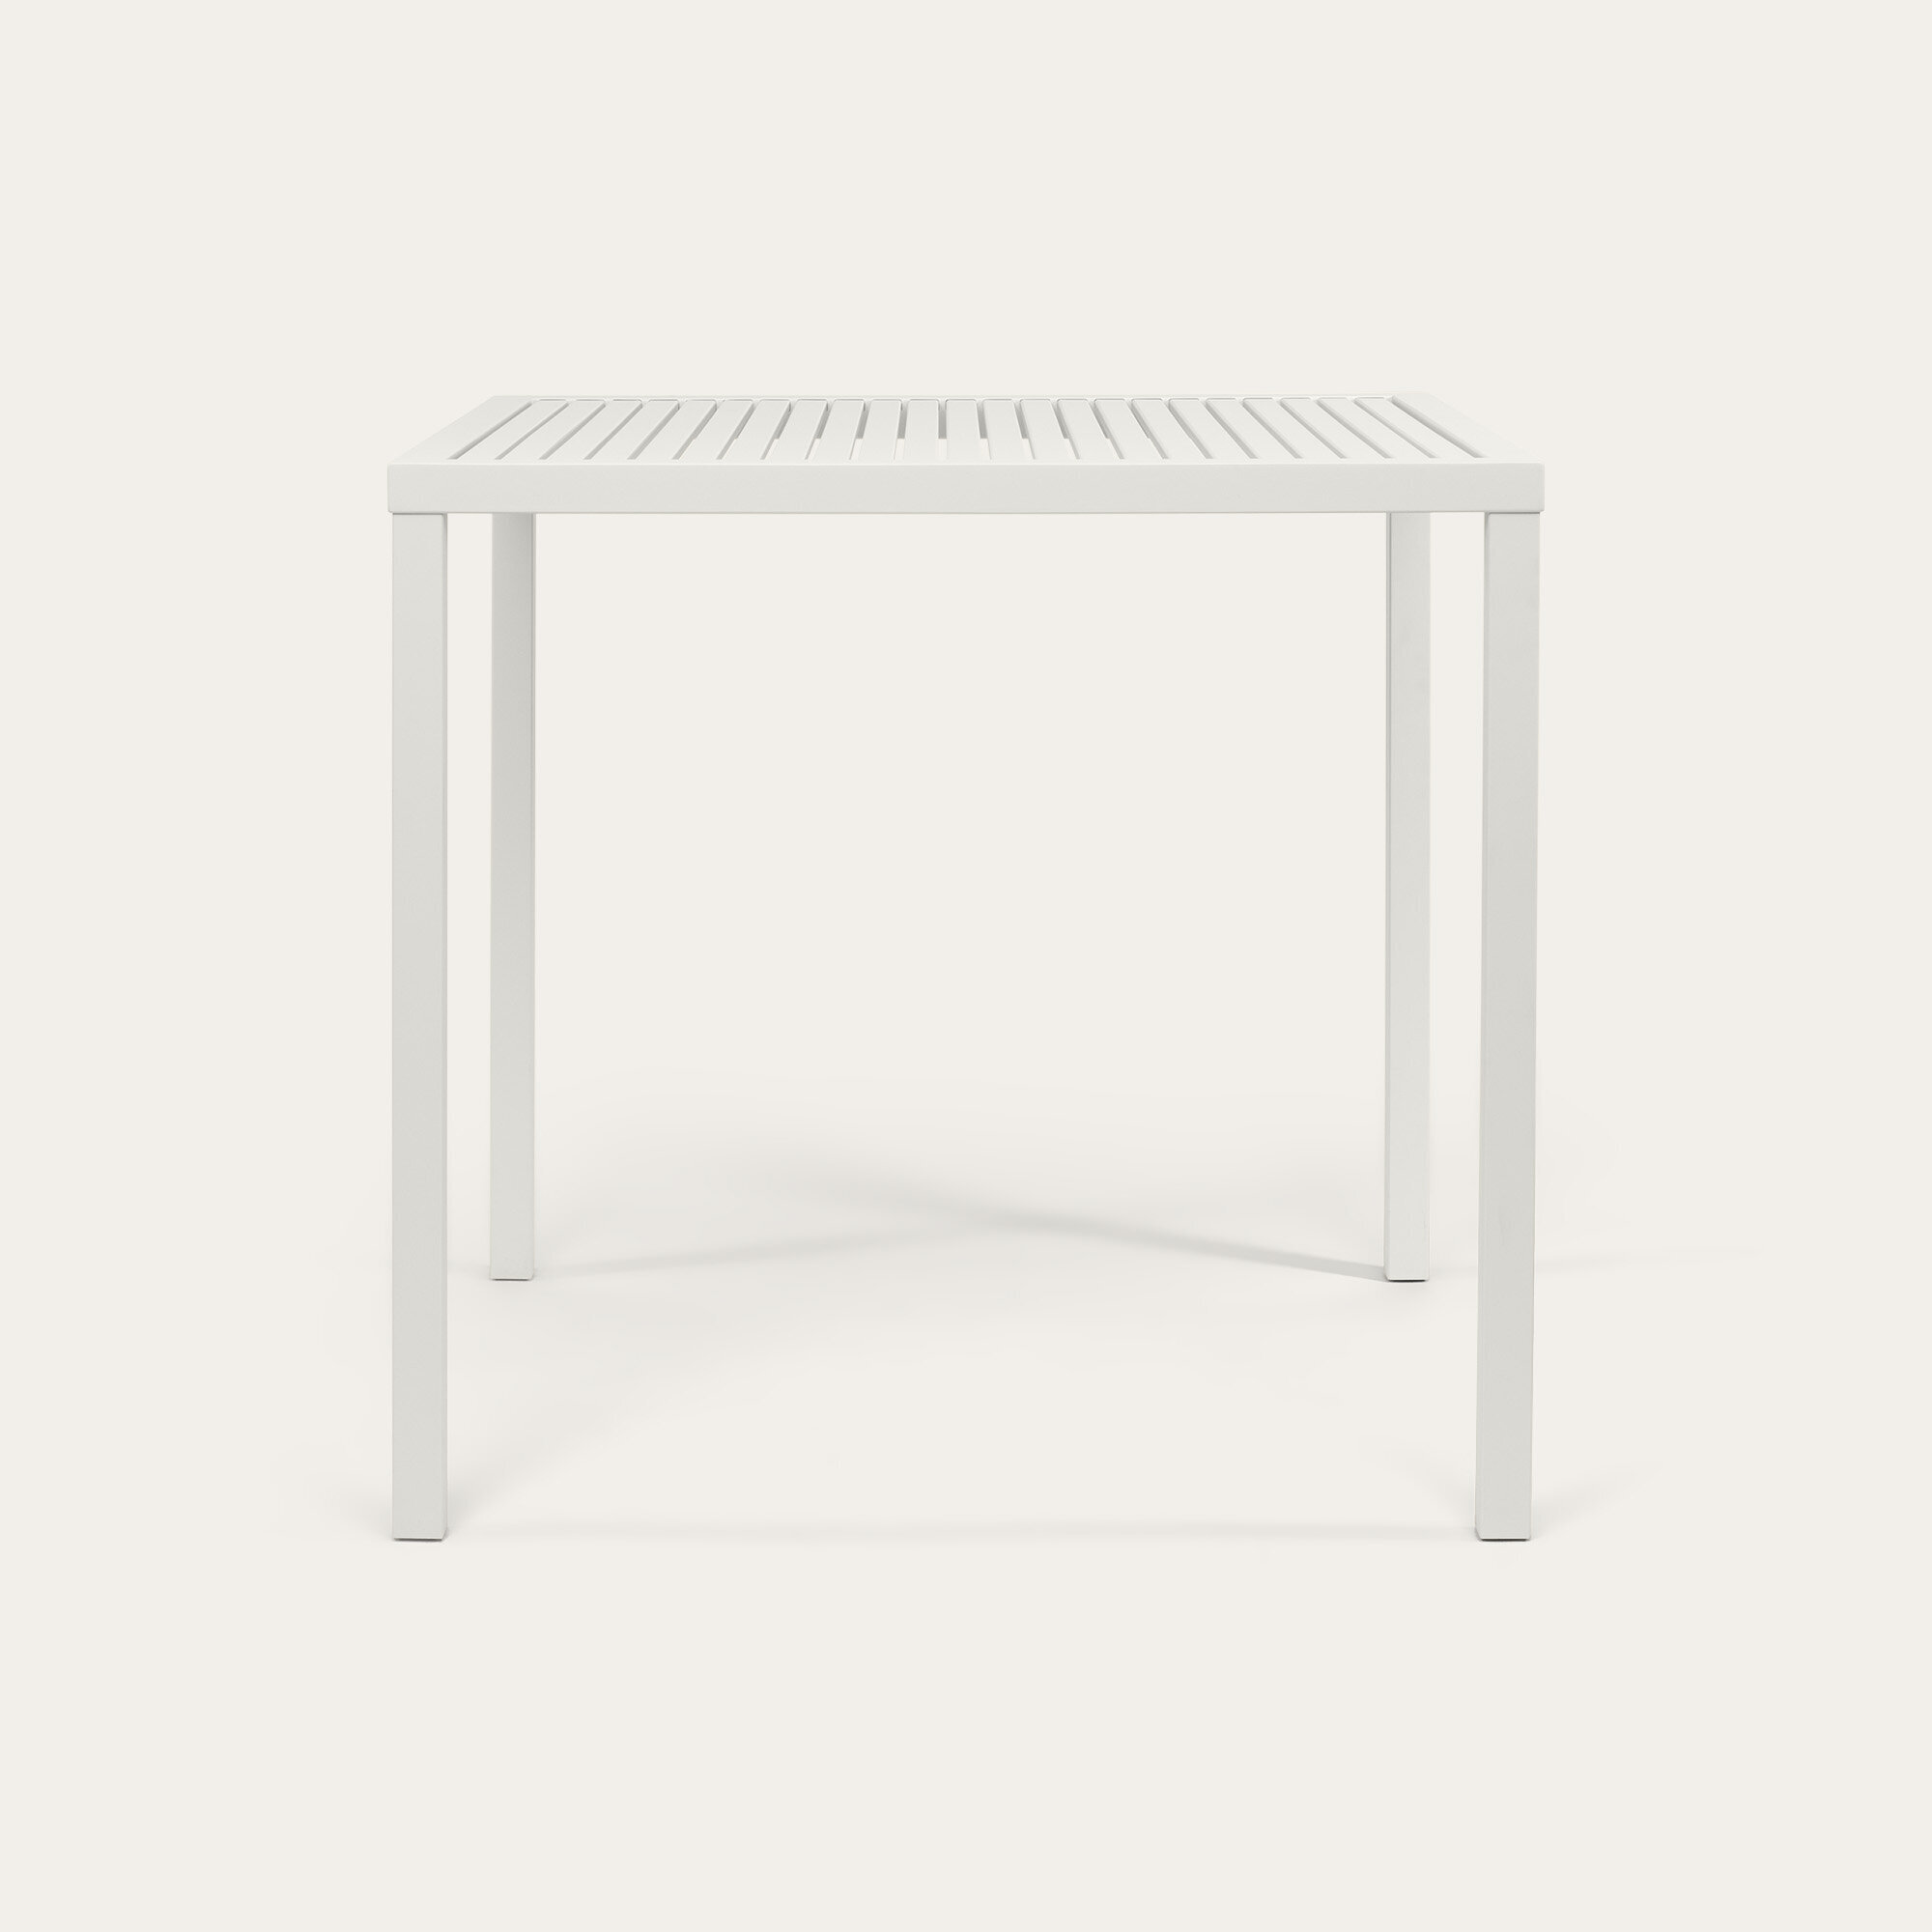 Square outdoor Design dining table | Trace Outdoor Table  White powdercoating KTL | White Powdercoat KTL | Studio HENK | 